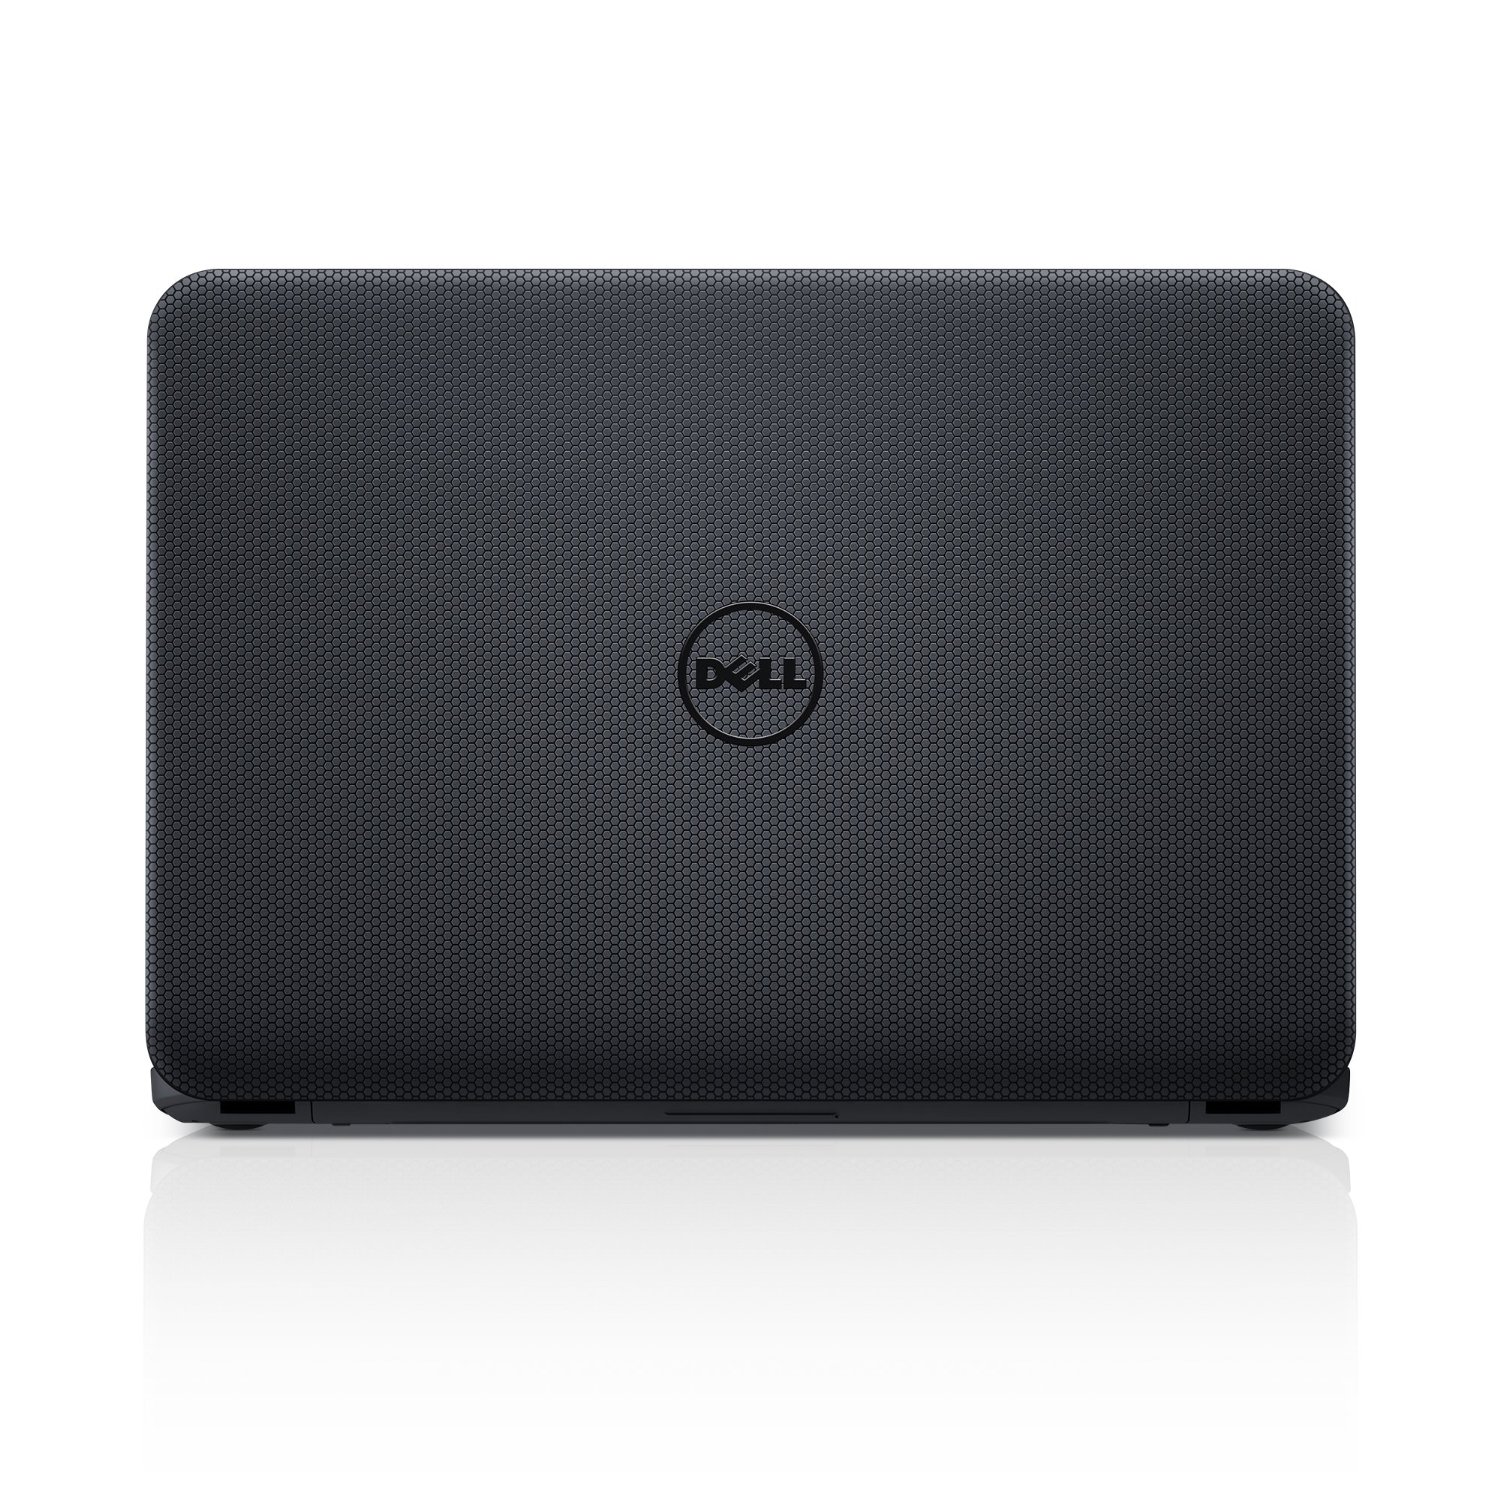 Dell Inspiron 15.6-Inch Laptop